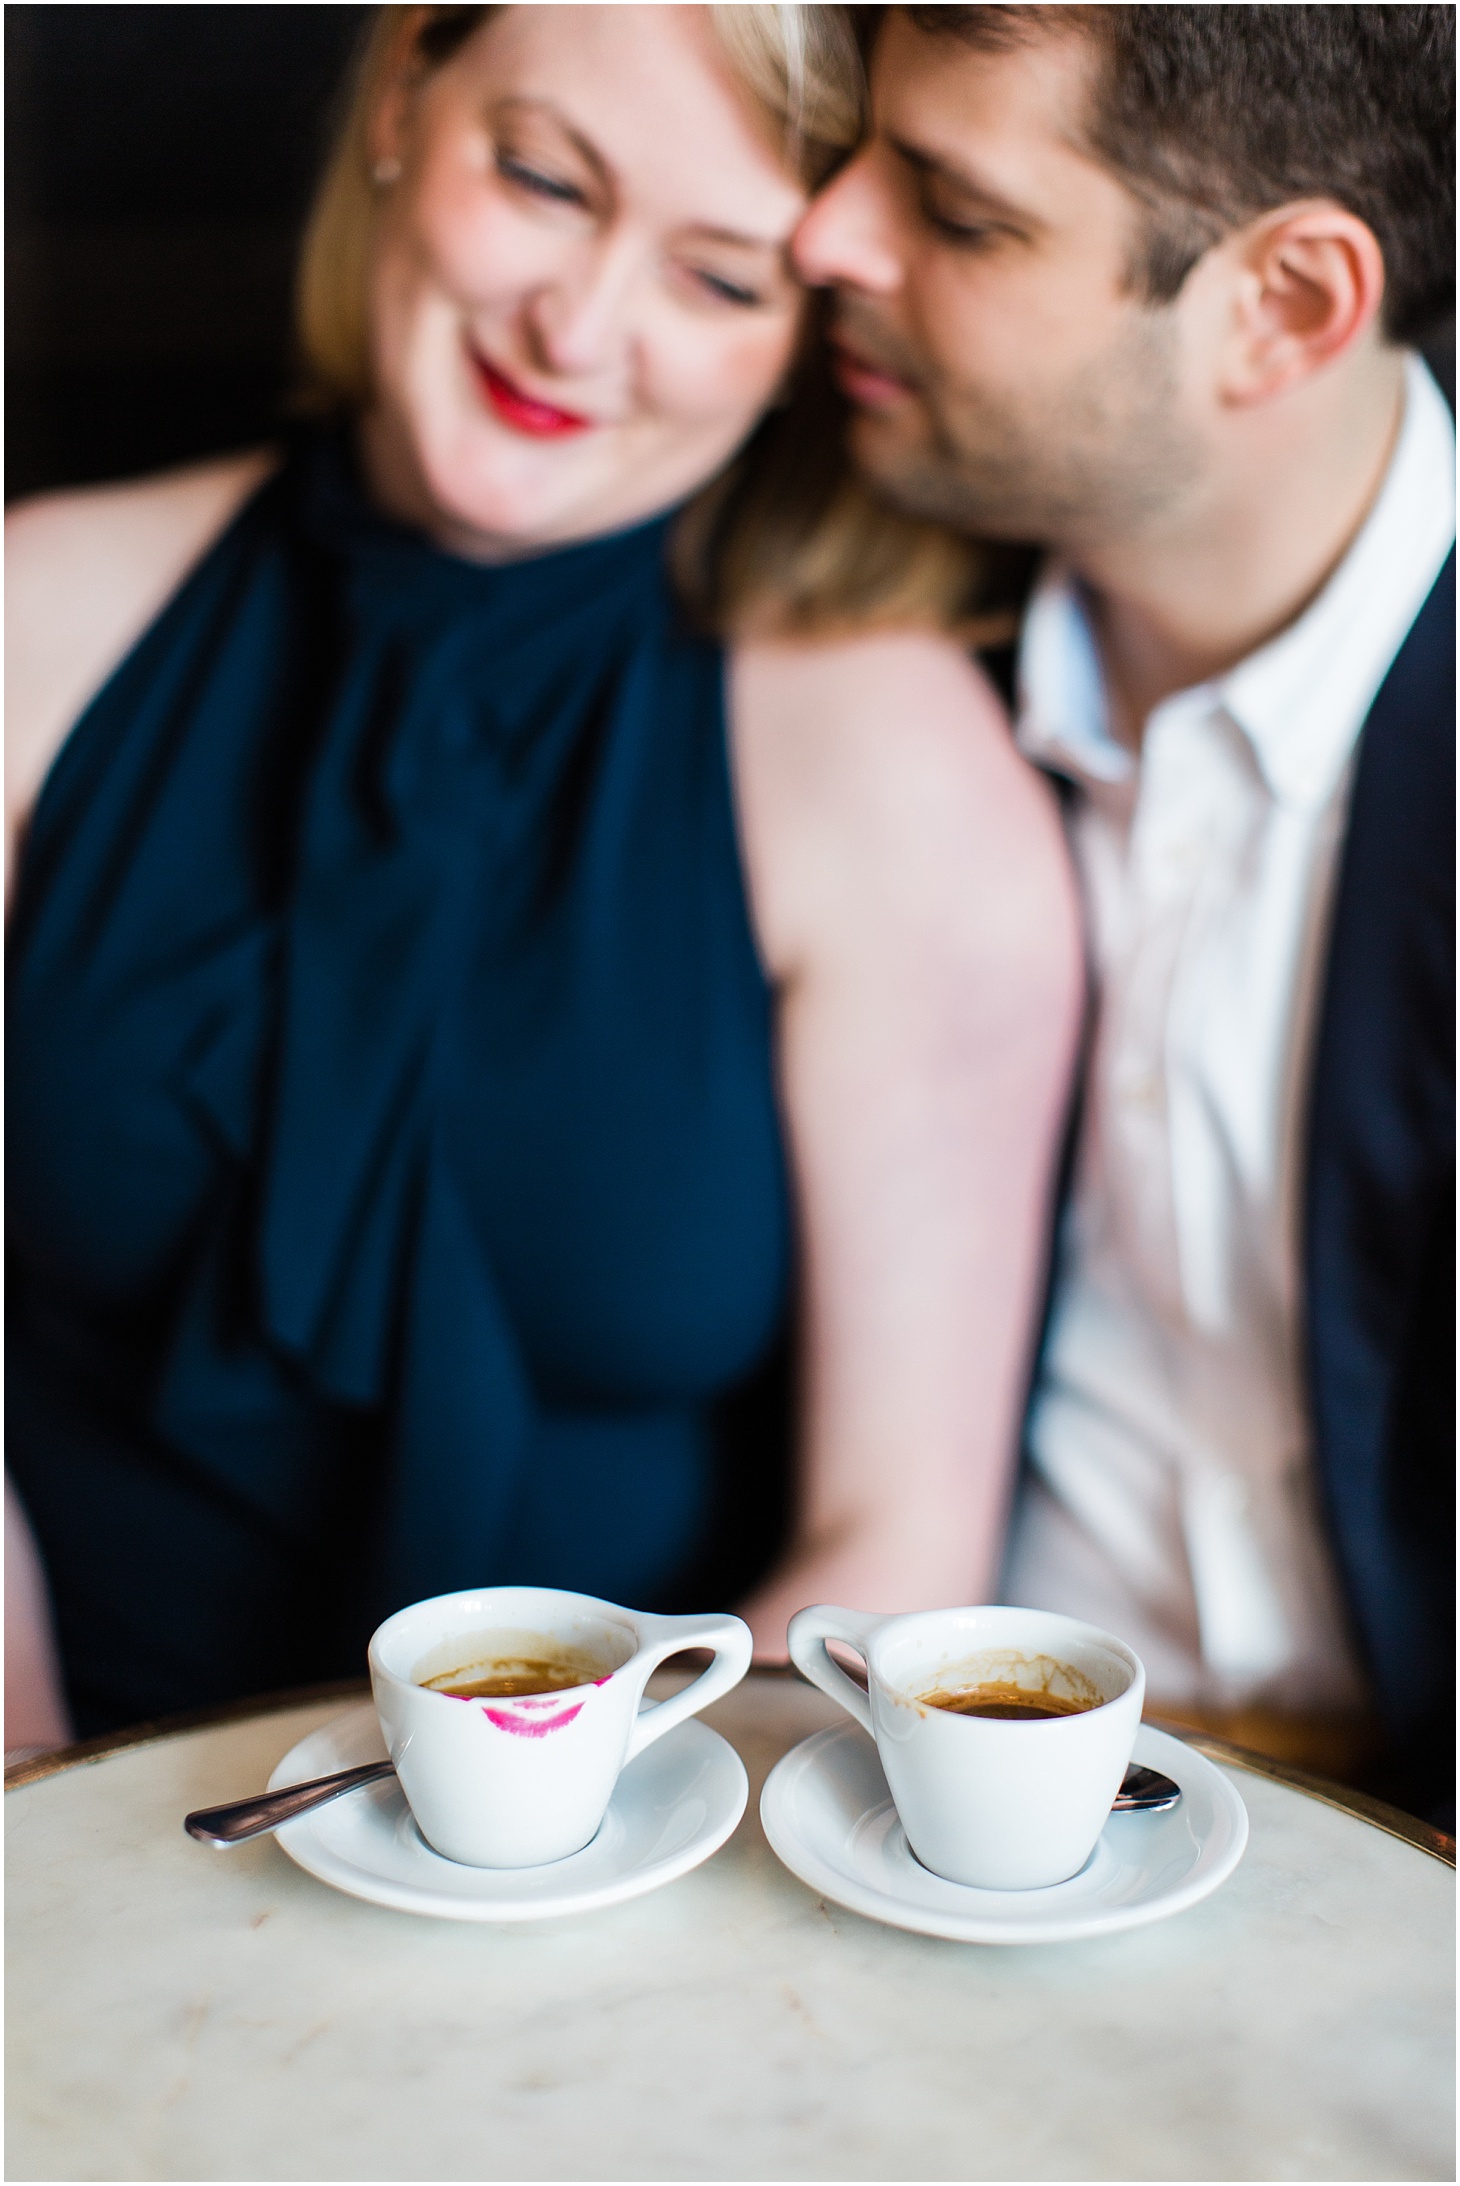 Morning Engagement Portraits in Washington, DC | Formal Winter Engagement Session at National Gallery of Art | Sarah Bradshaw Photography